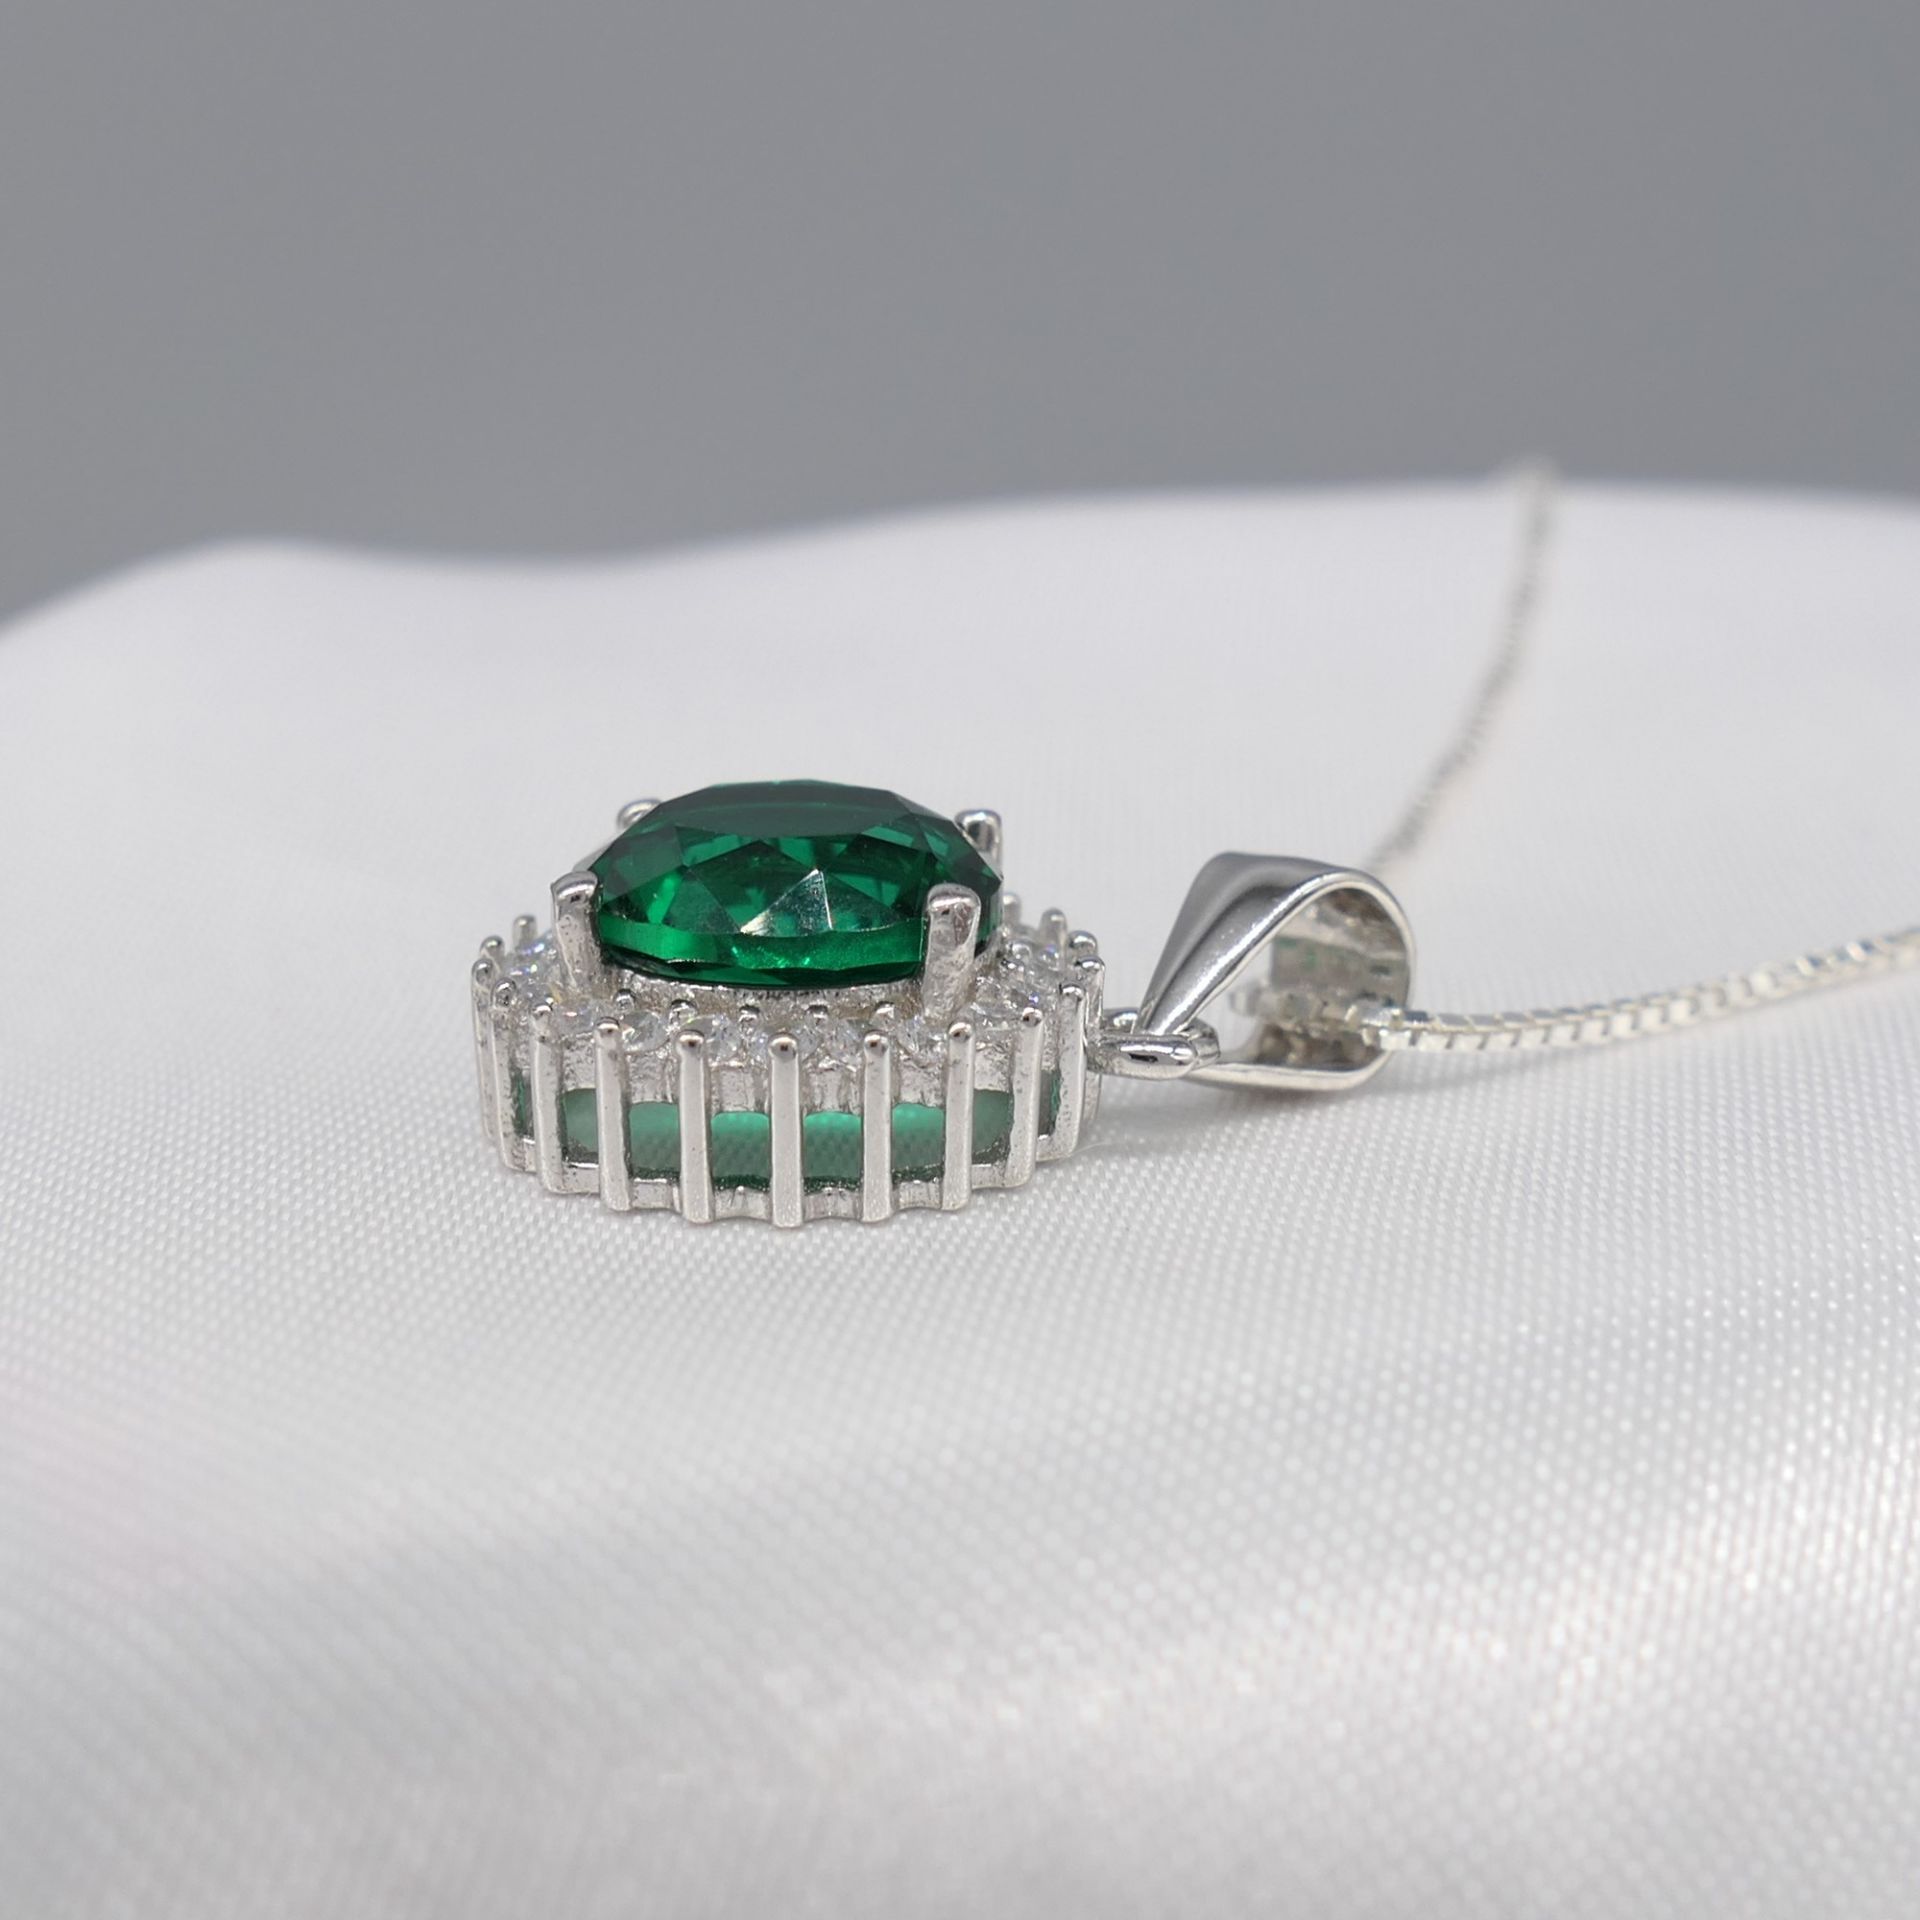 Green gem pendant and chain in sterling silver - Image 6 of 6